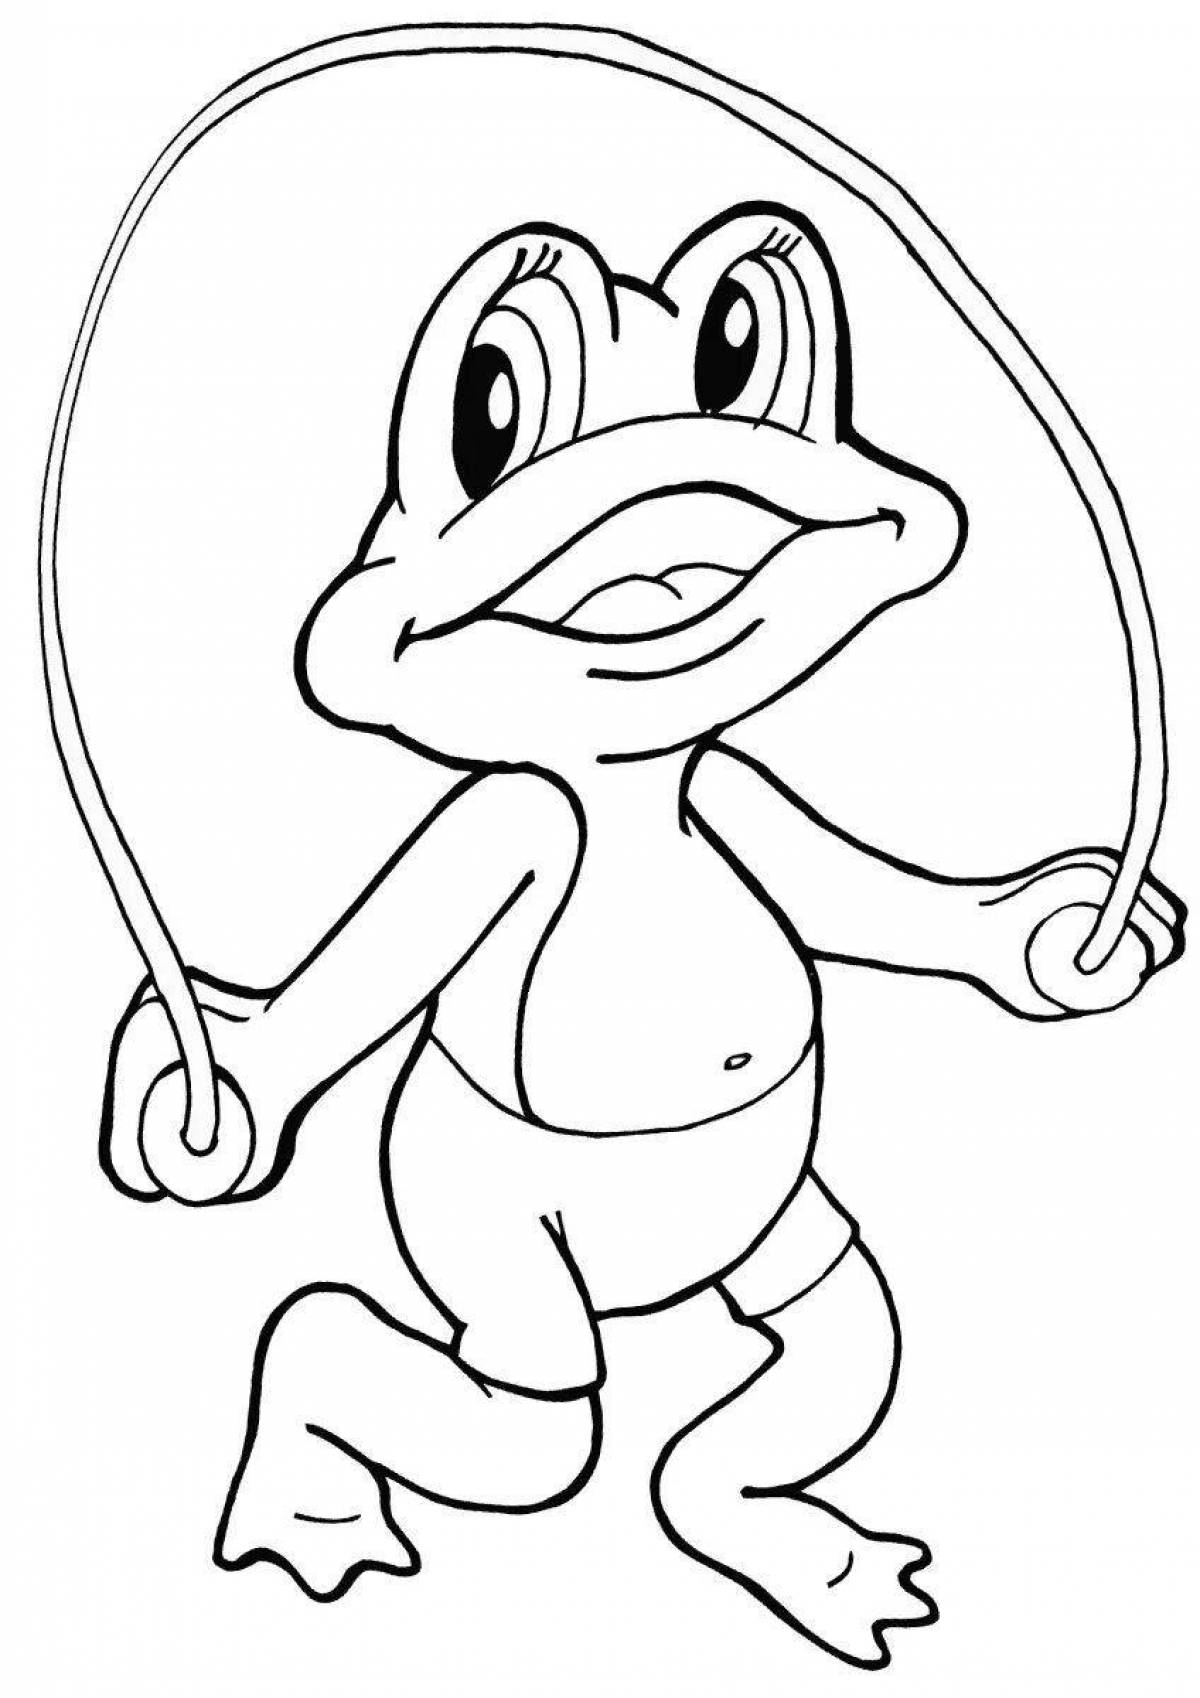 Coloring page with jump rope